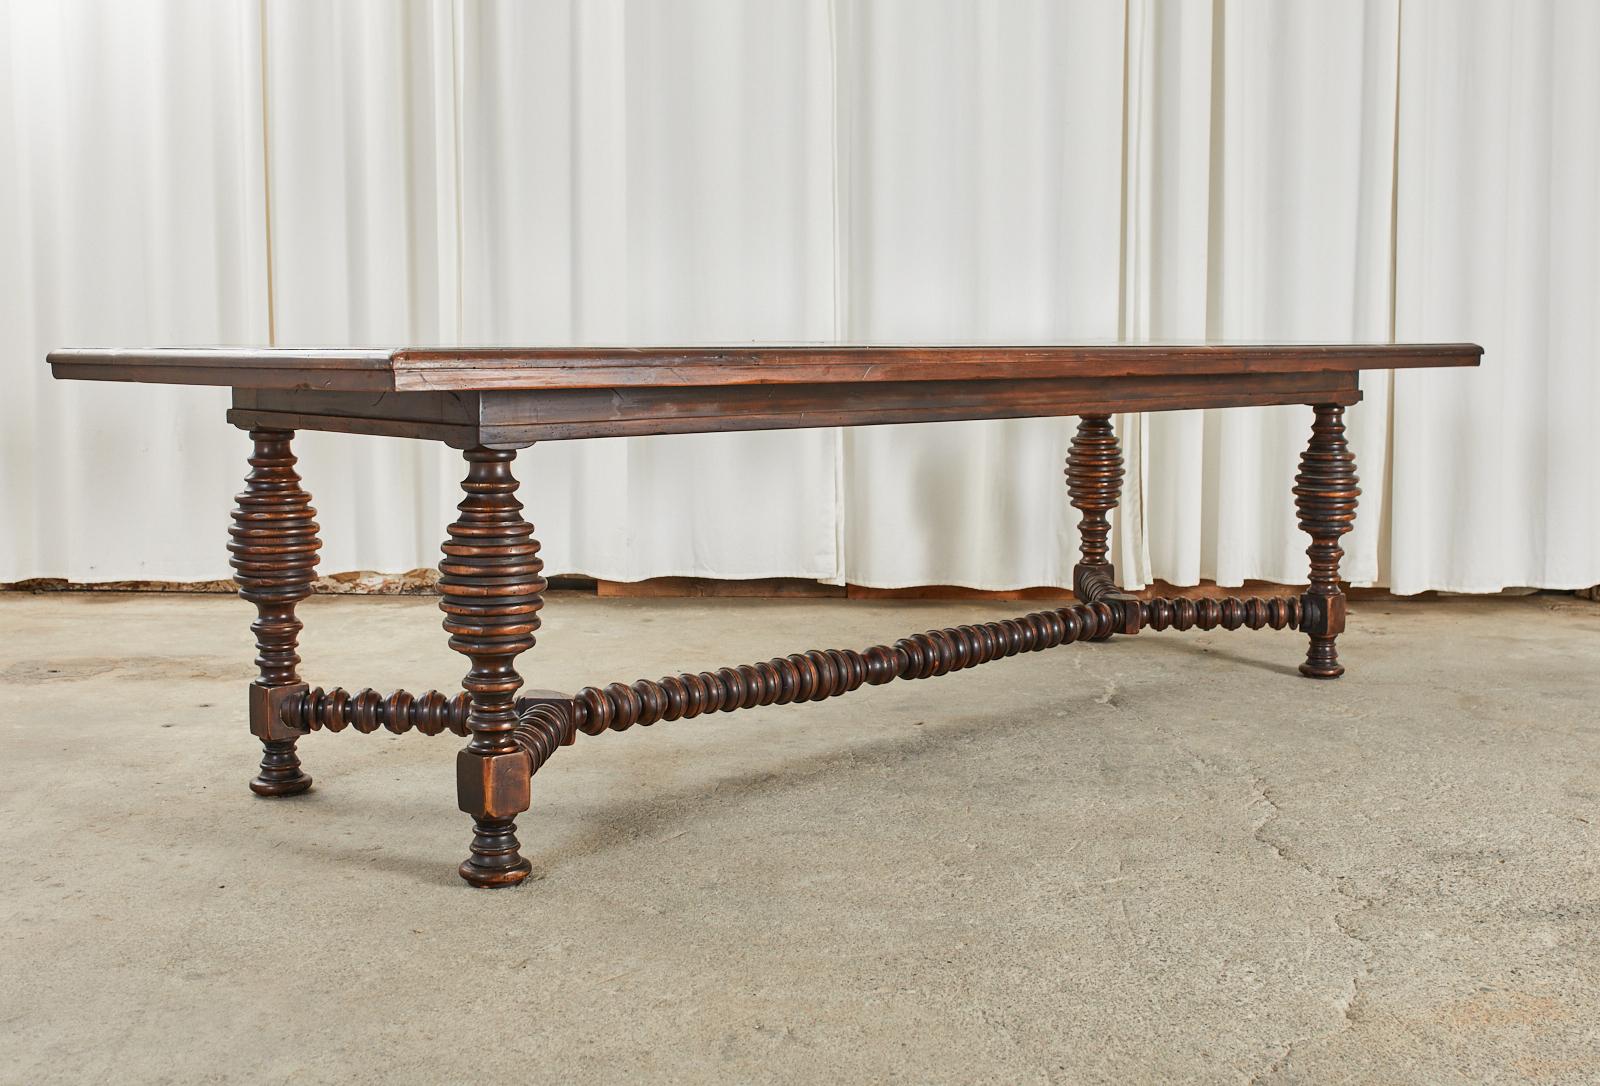 Italian Portuguese Baroque Style Dining Table with Parquetry Inlay